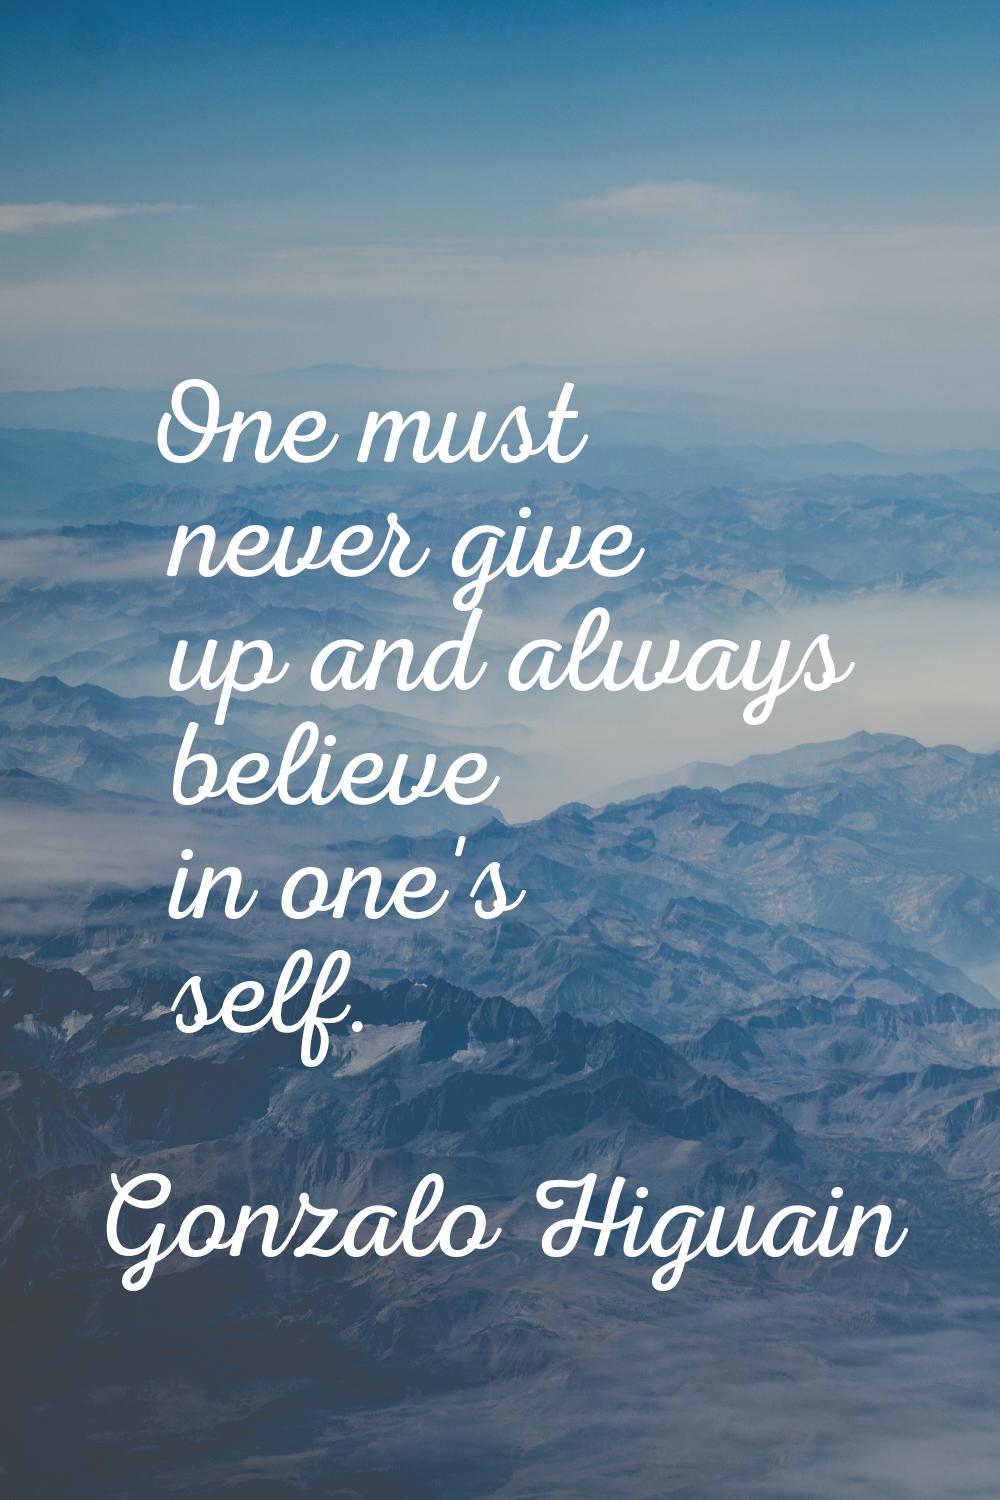 One must never give up and always believe in one's self.